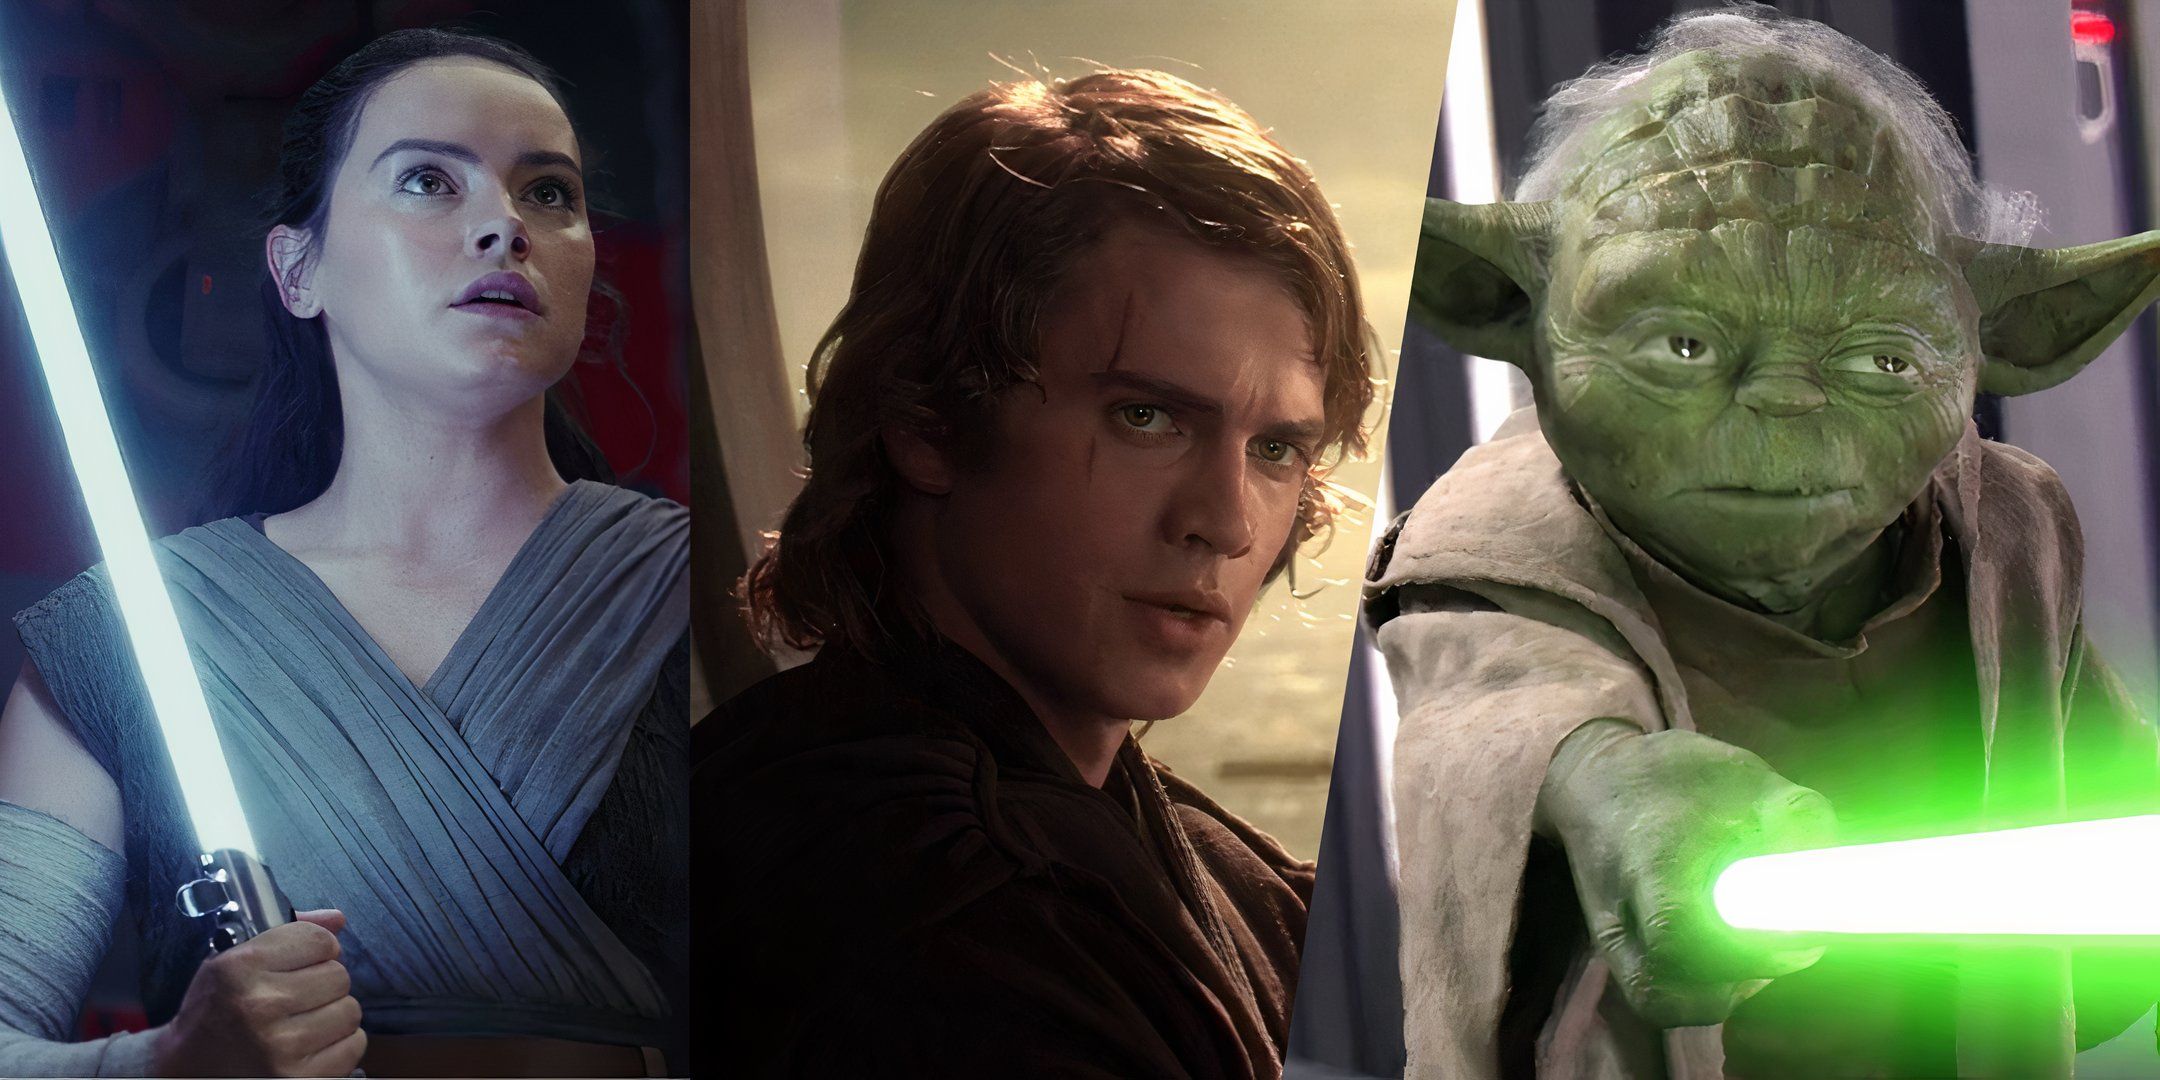 Rey and Yoda with their lightsabers drawn, and Anakin in the center, from Revenge of the Sith and The Last Jedi.